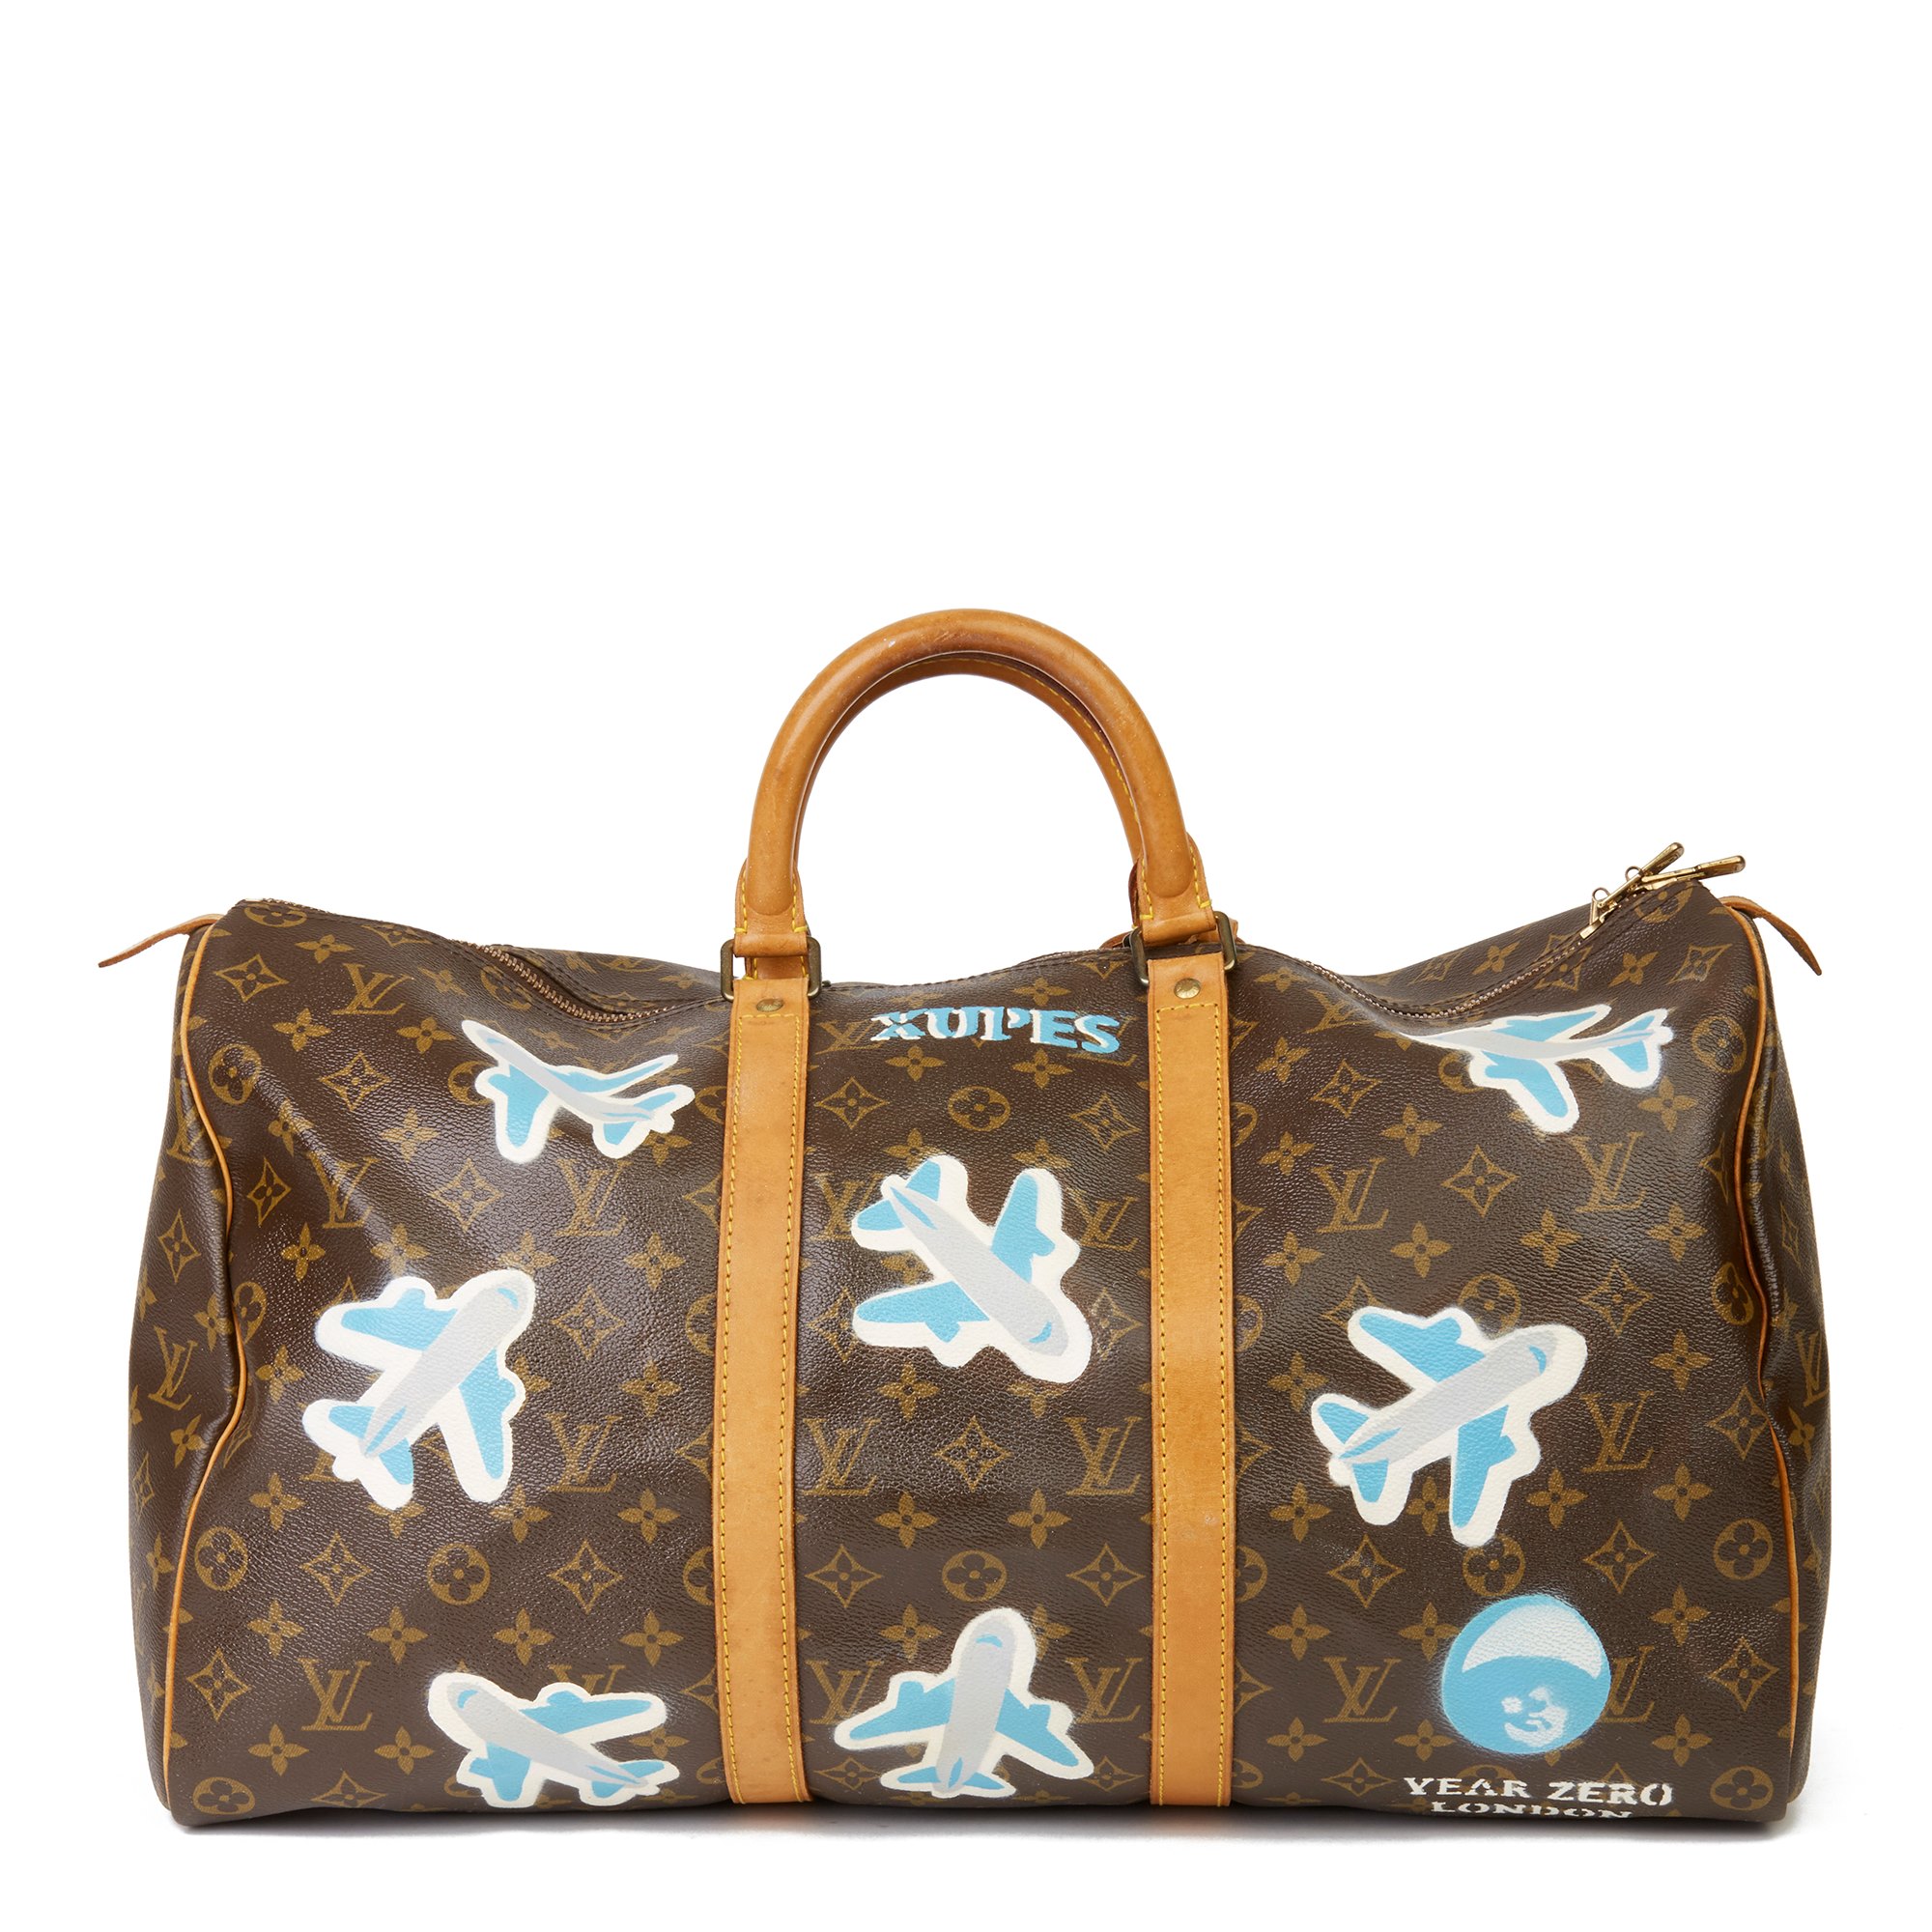 Louis Vuitton releases $39K airplane-themed purse, prompting